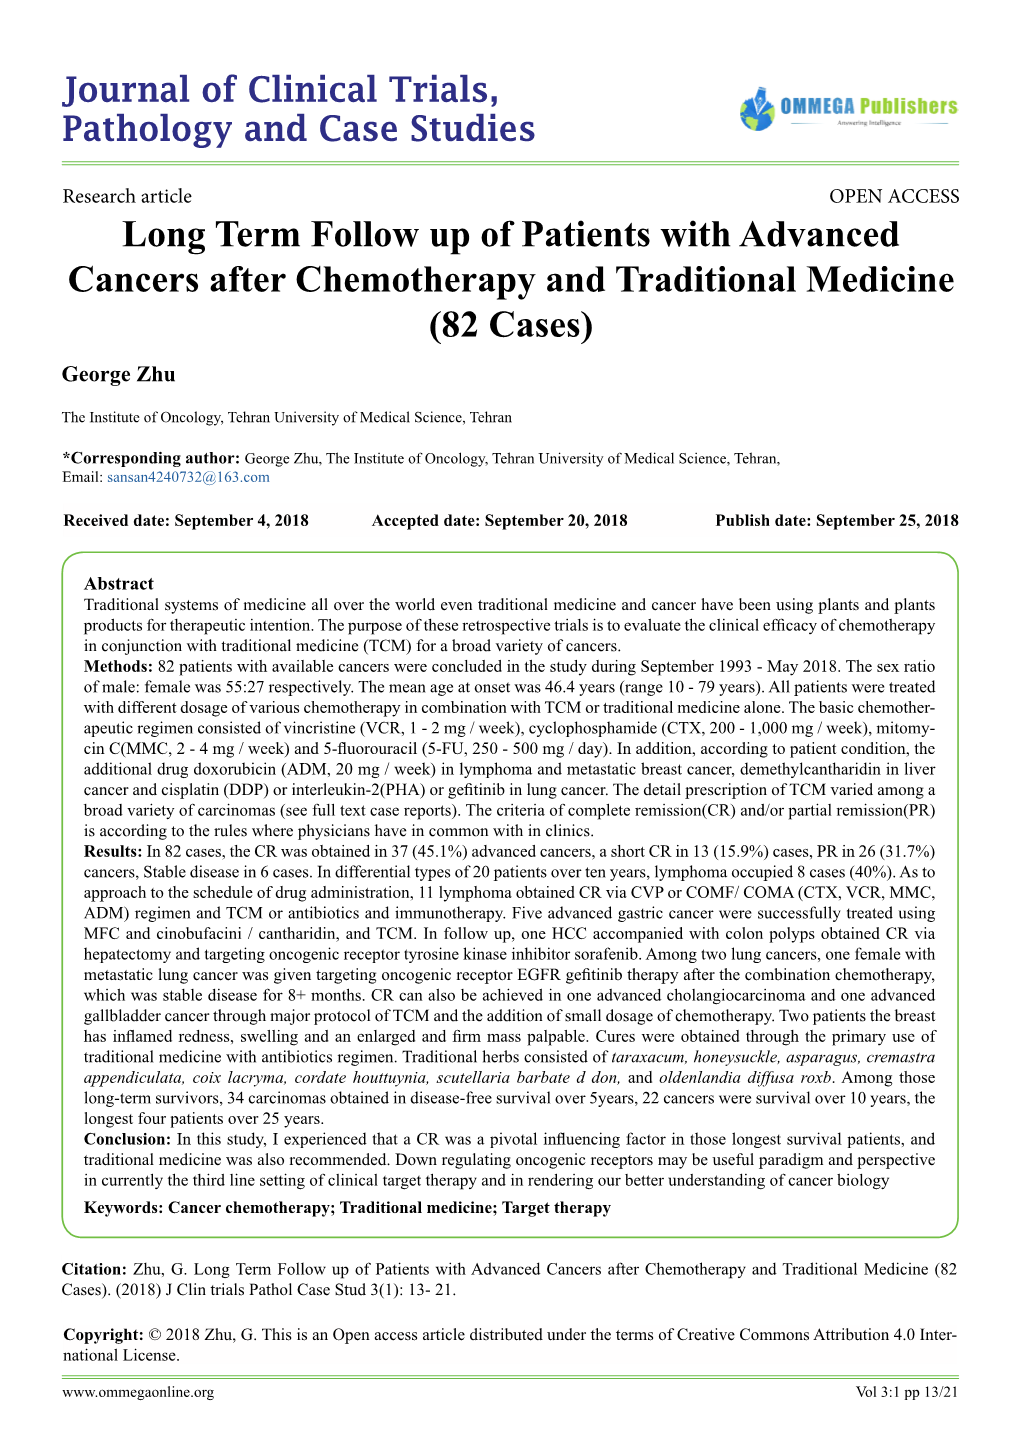 Long Term Follow up of Patients with Advanced Cancers After Chemotherapy and Traditional Medicine (82 Cases) George Zhu